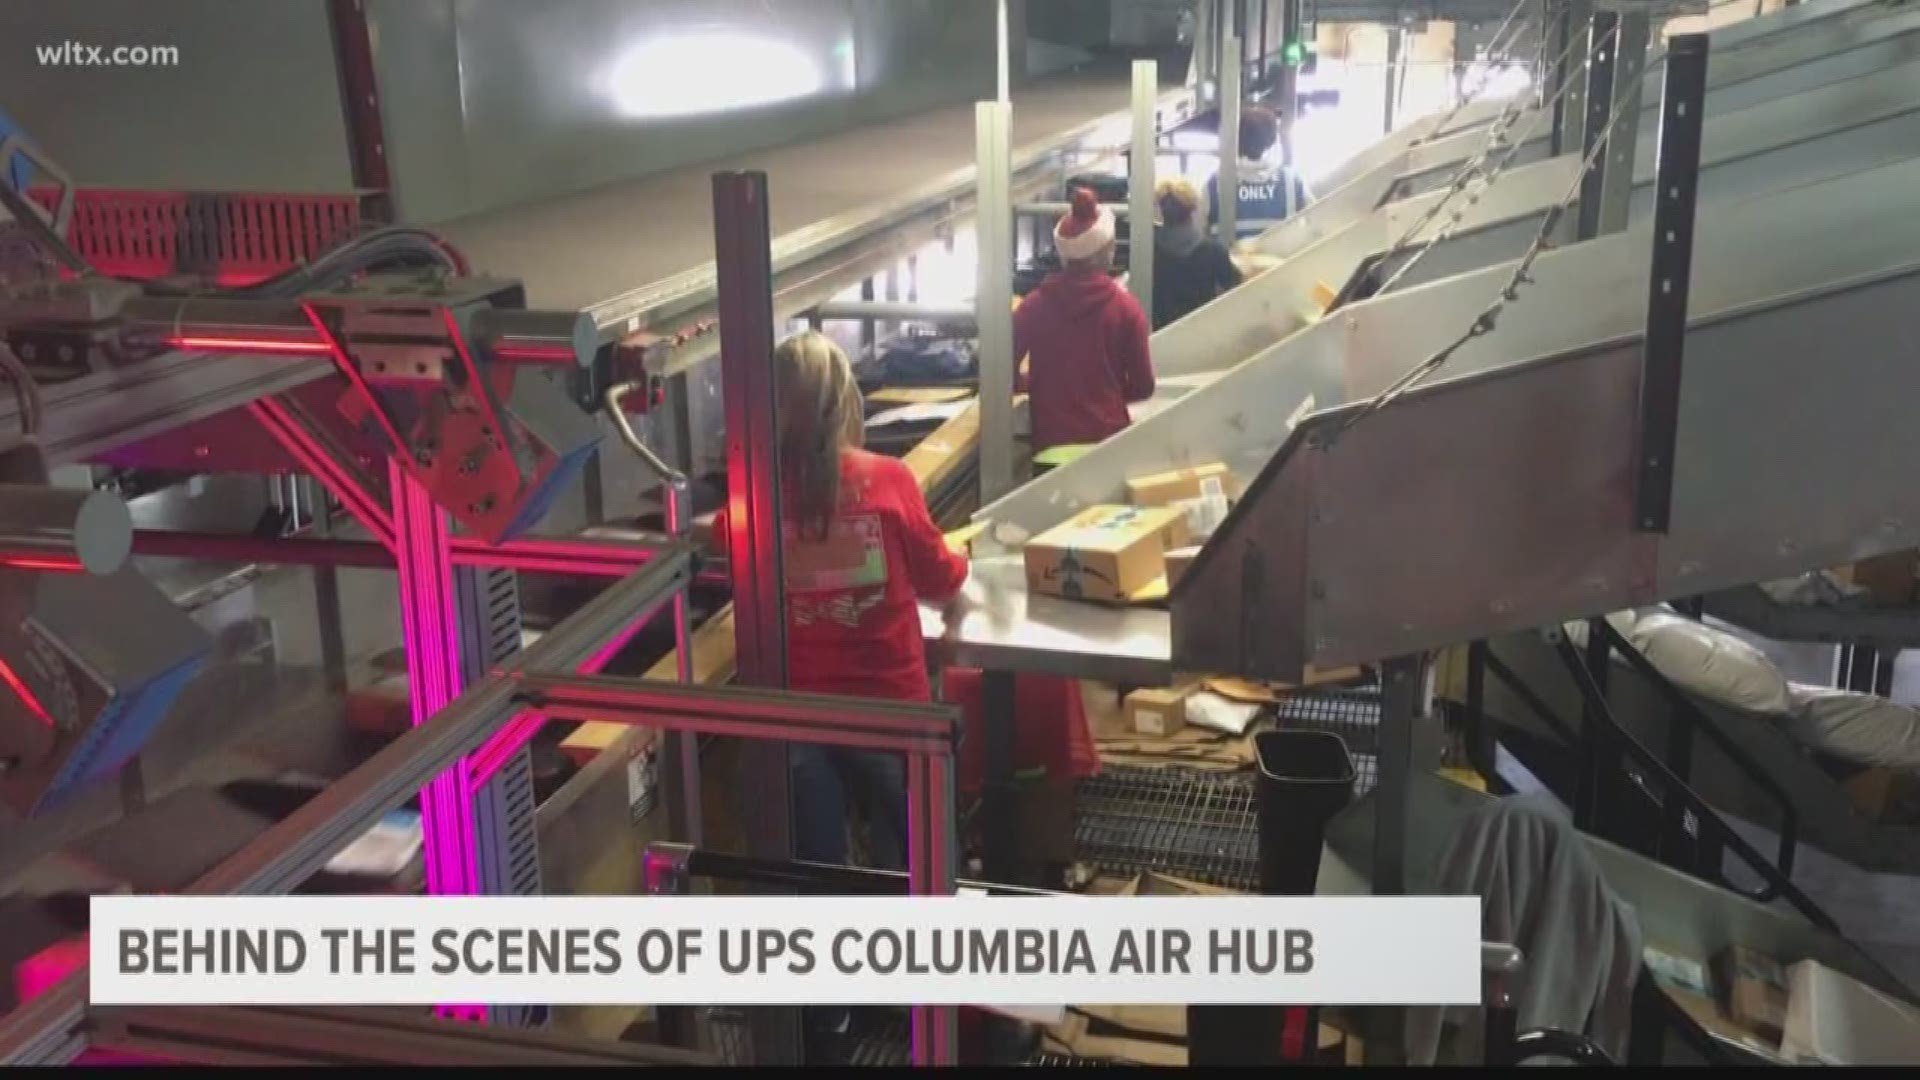 The UPS Air Hub here in Columbia were they say nearly three hundred and fifty thousand packages are being shipped out daily.